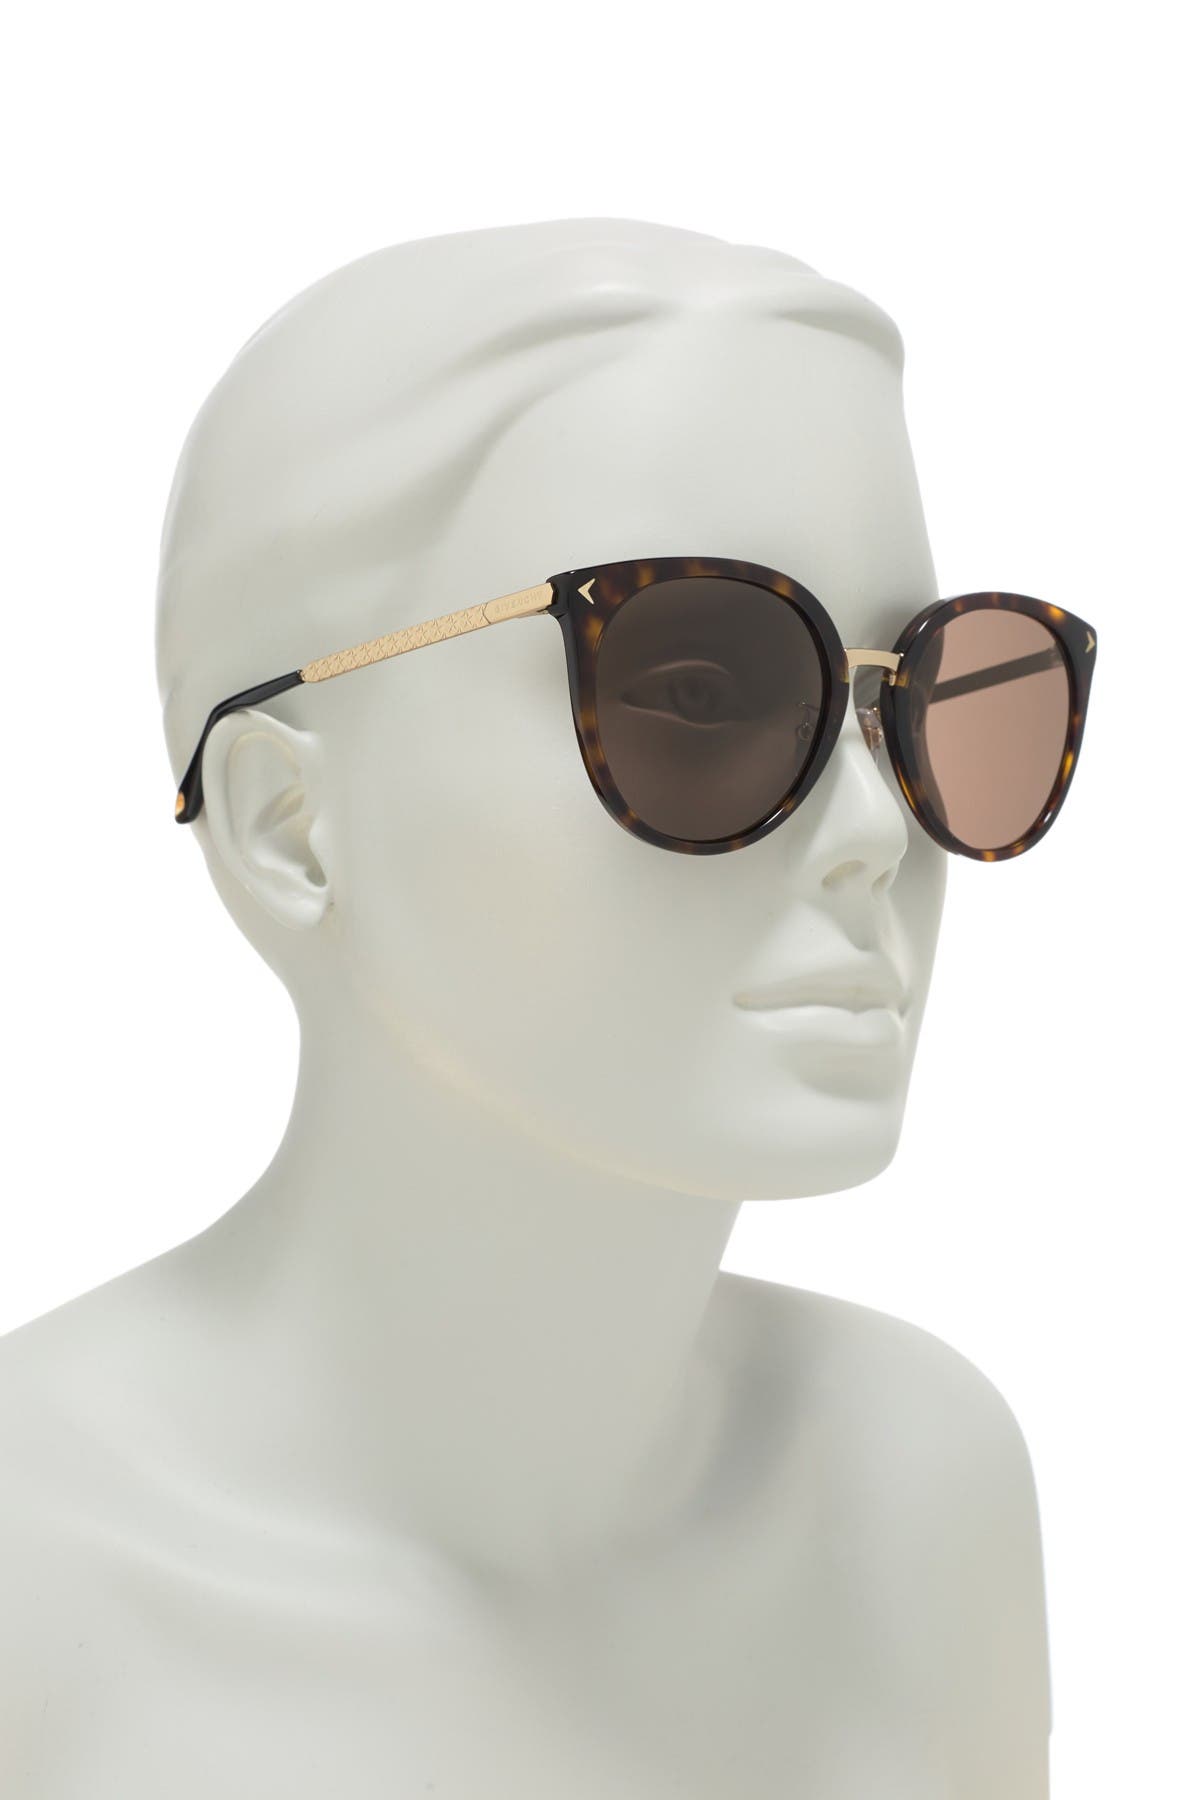 Top 51+ imagen givenchy 56mm round sunglasses